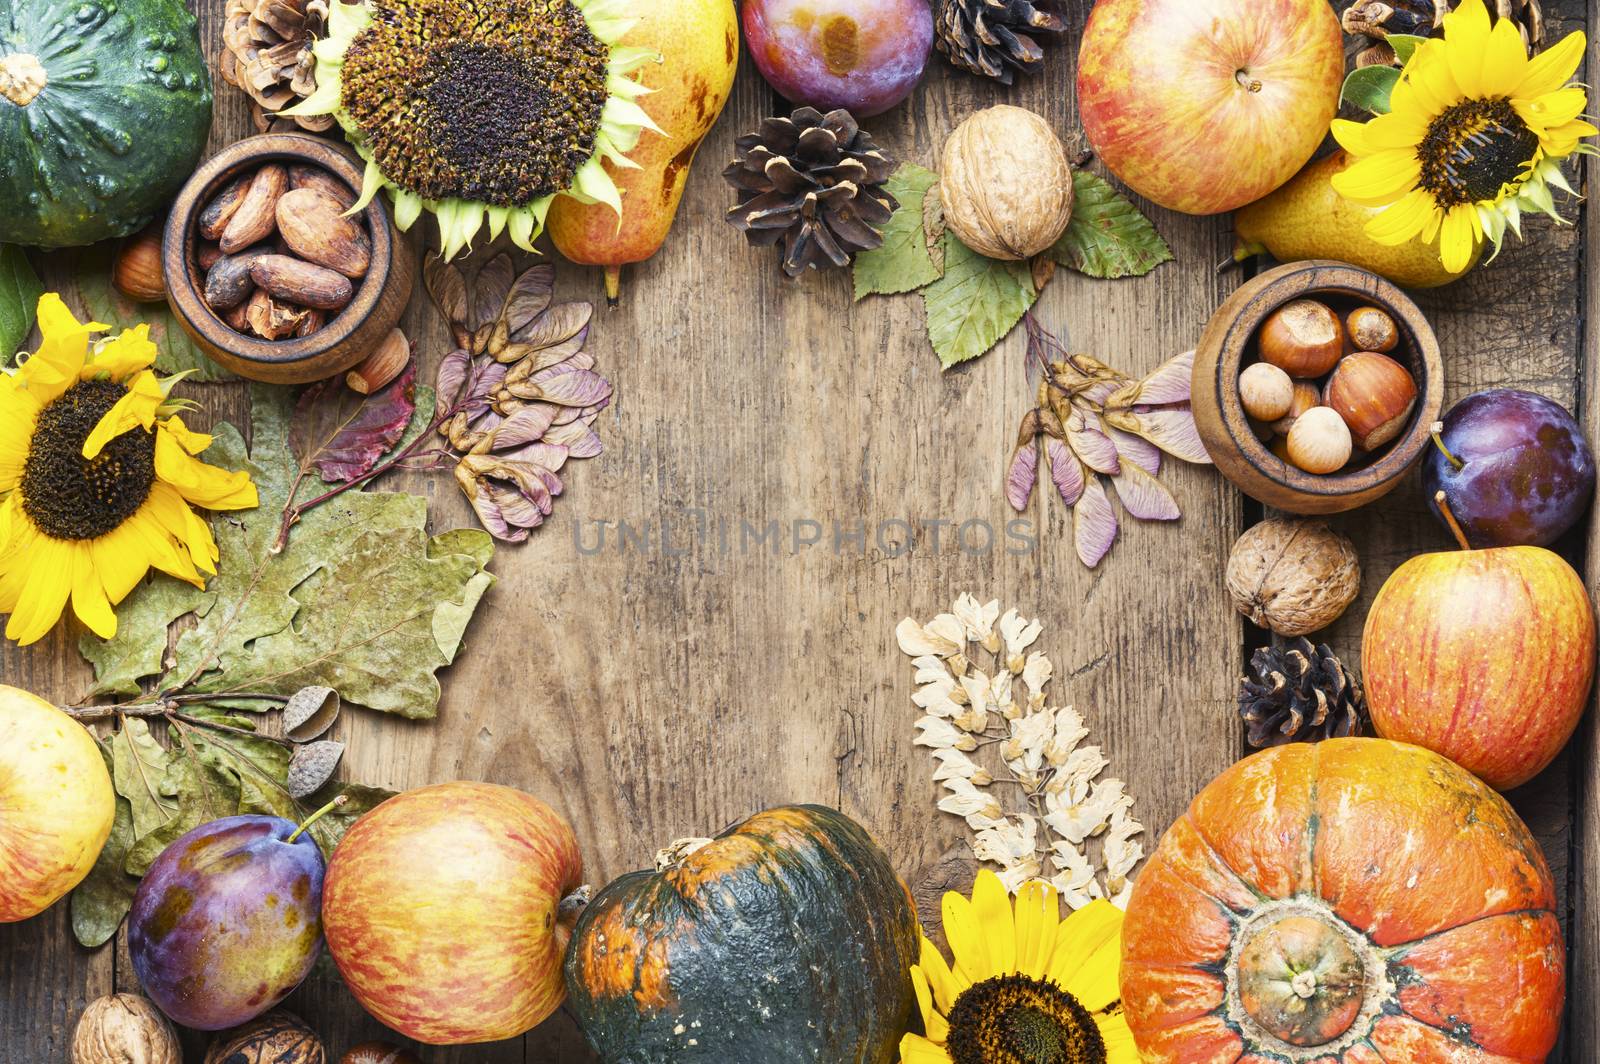 Pumpkins,nut and fruits in autumn still life on wooden table.Fall still life